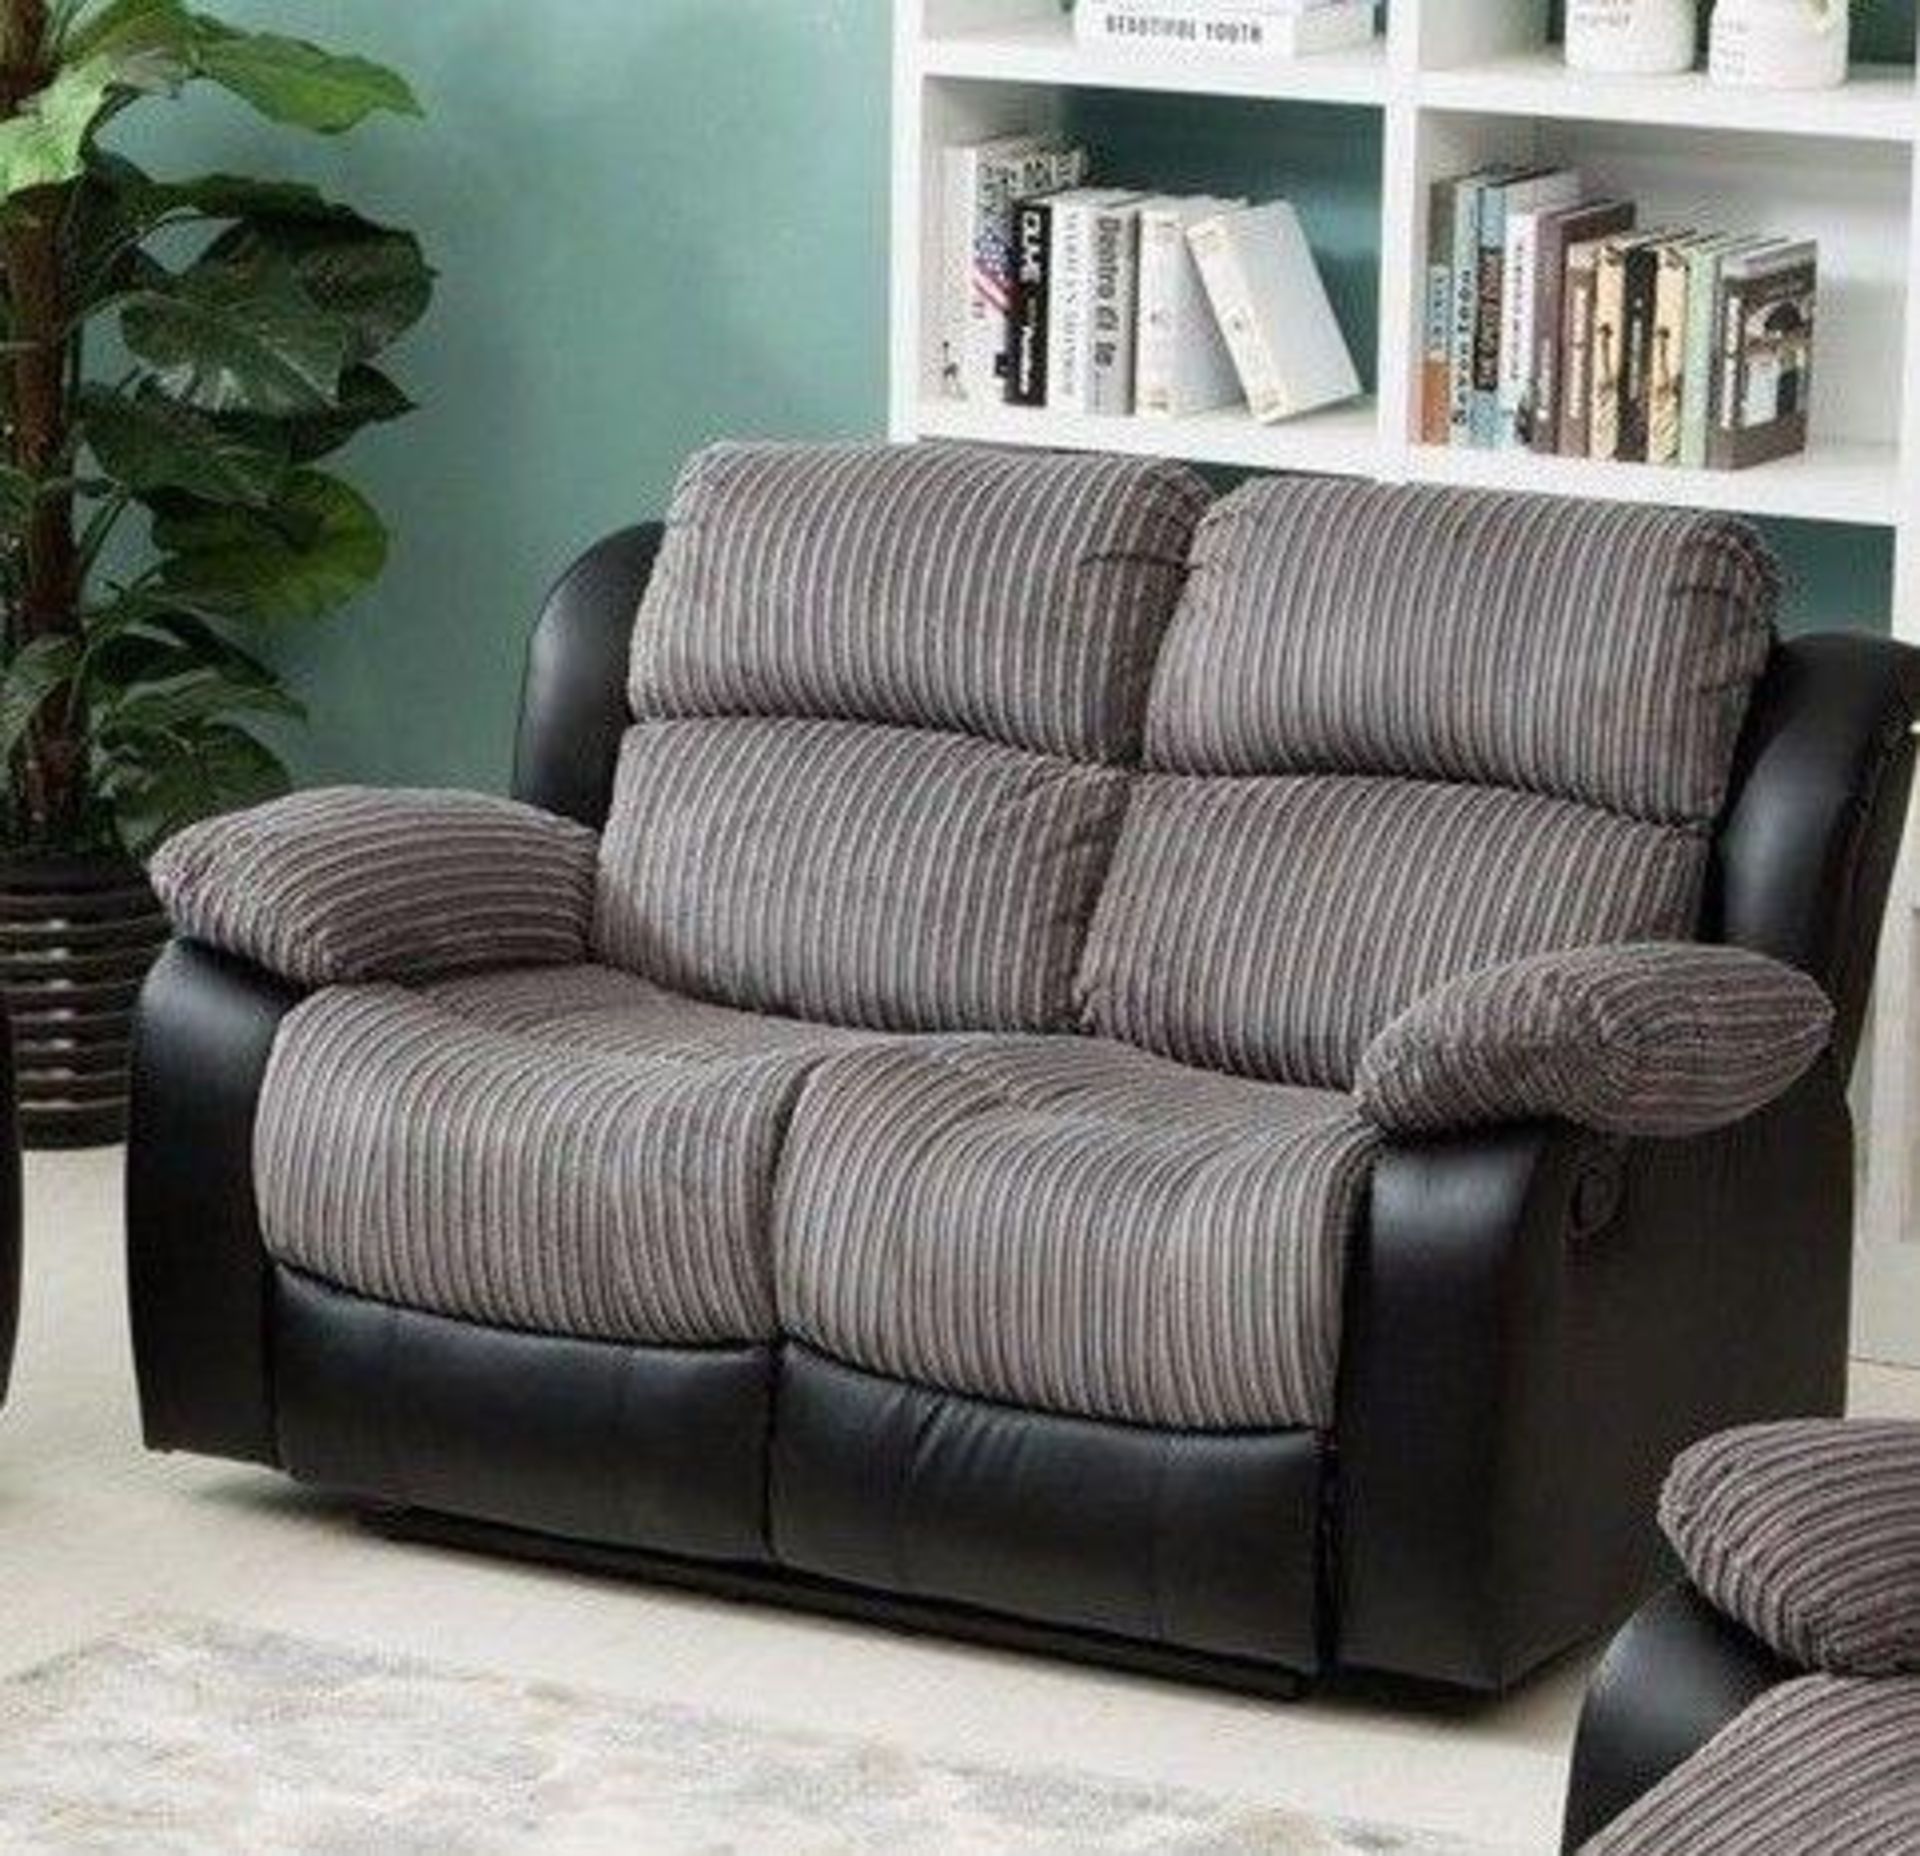 Brand New Boxed 3 Seater Plus 2 Seater California Sofas In Black/Grey - Image 3 of 3